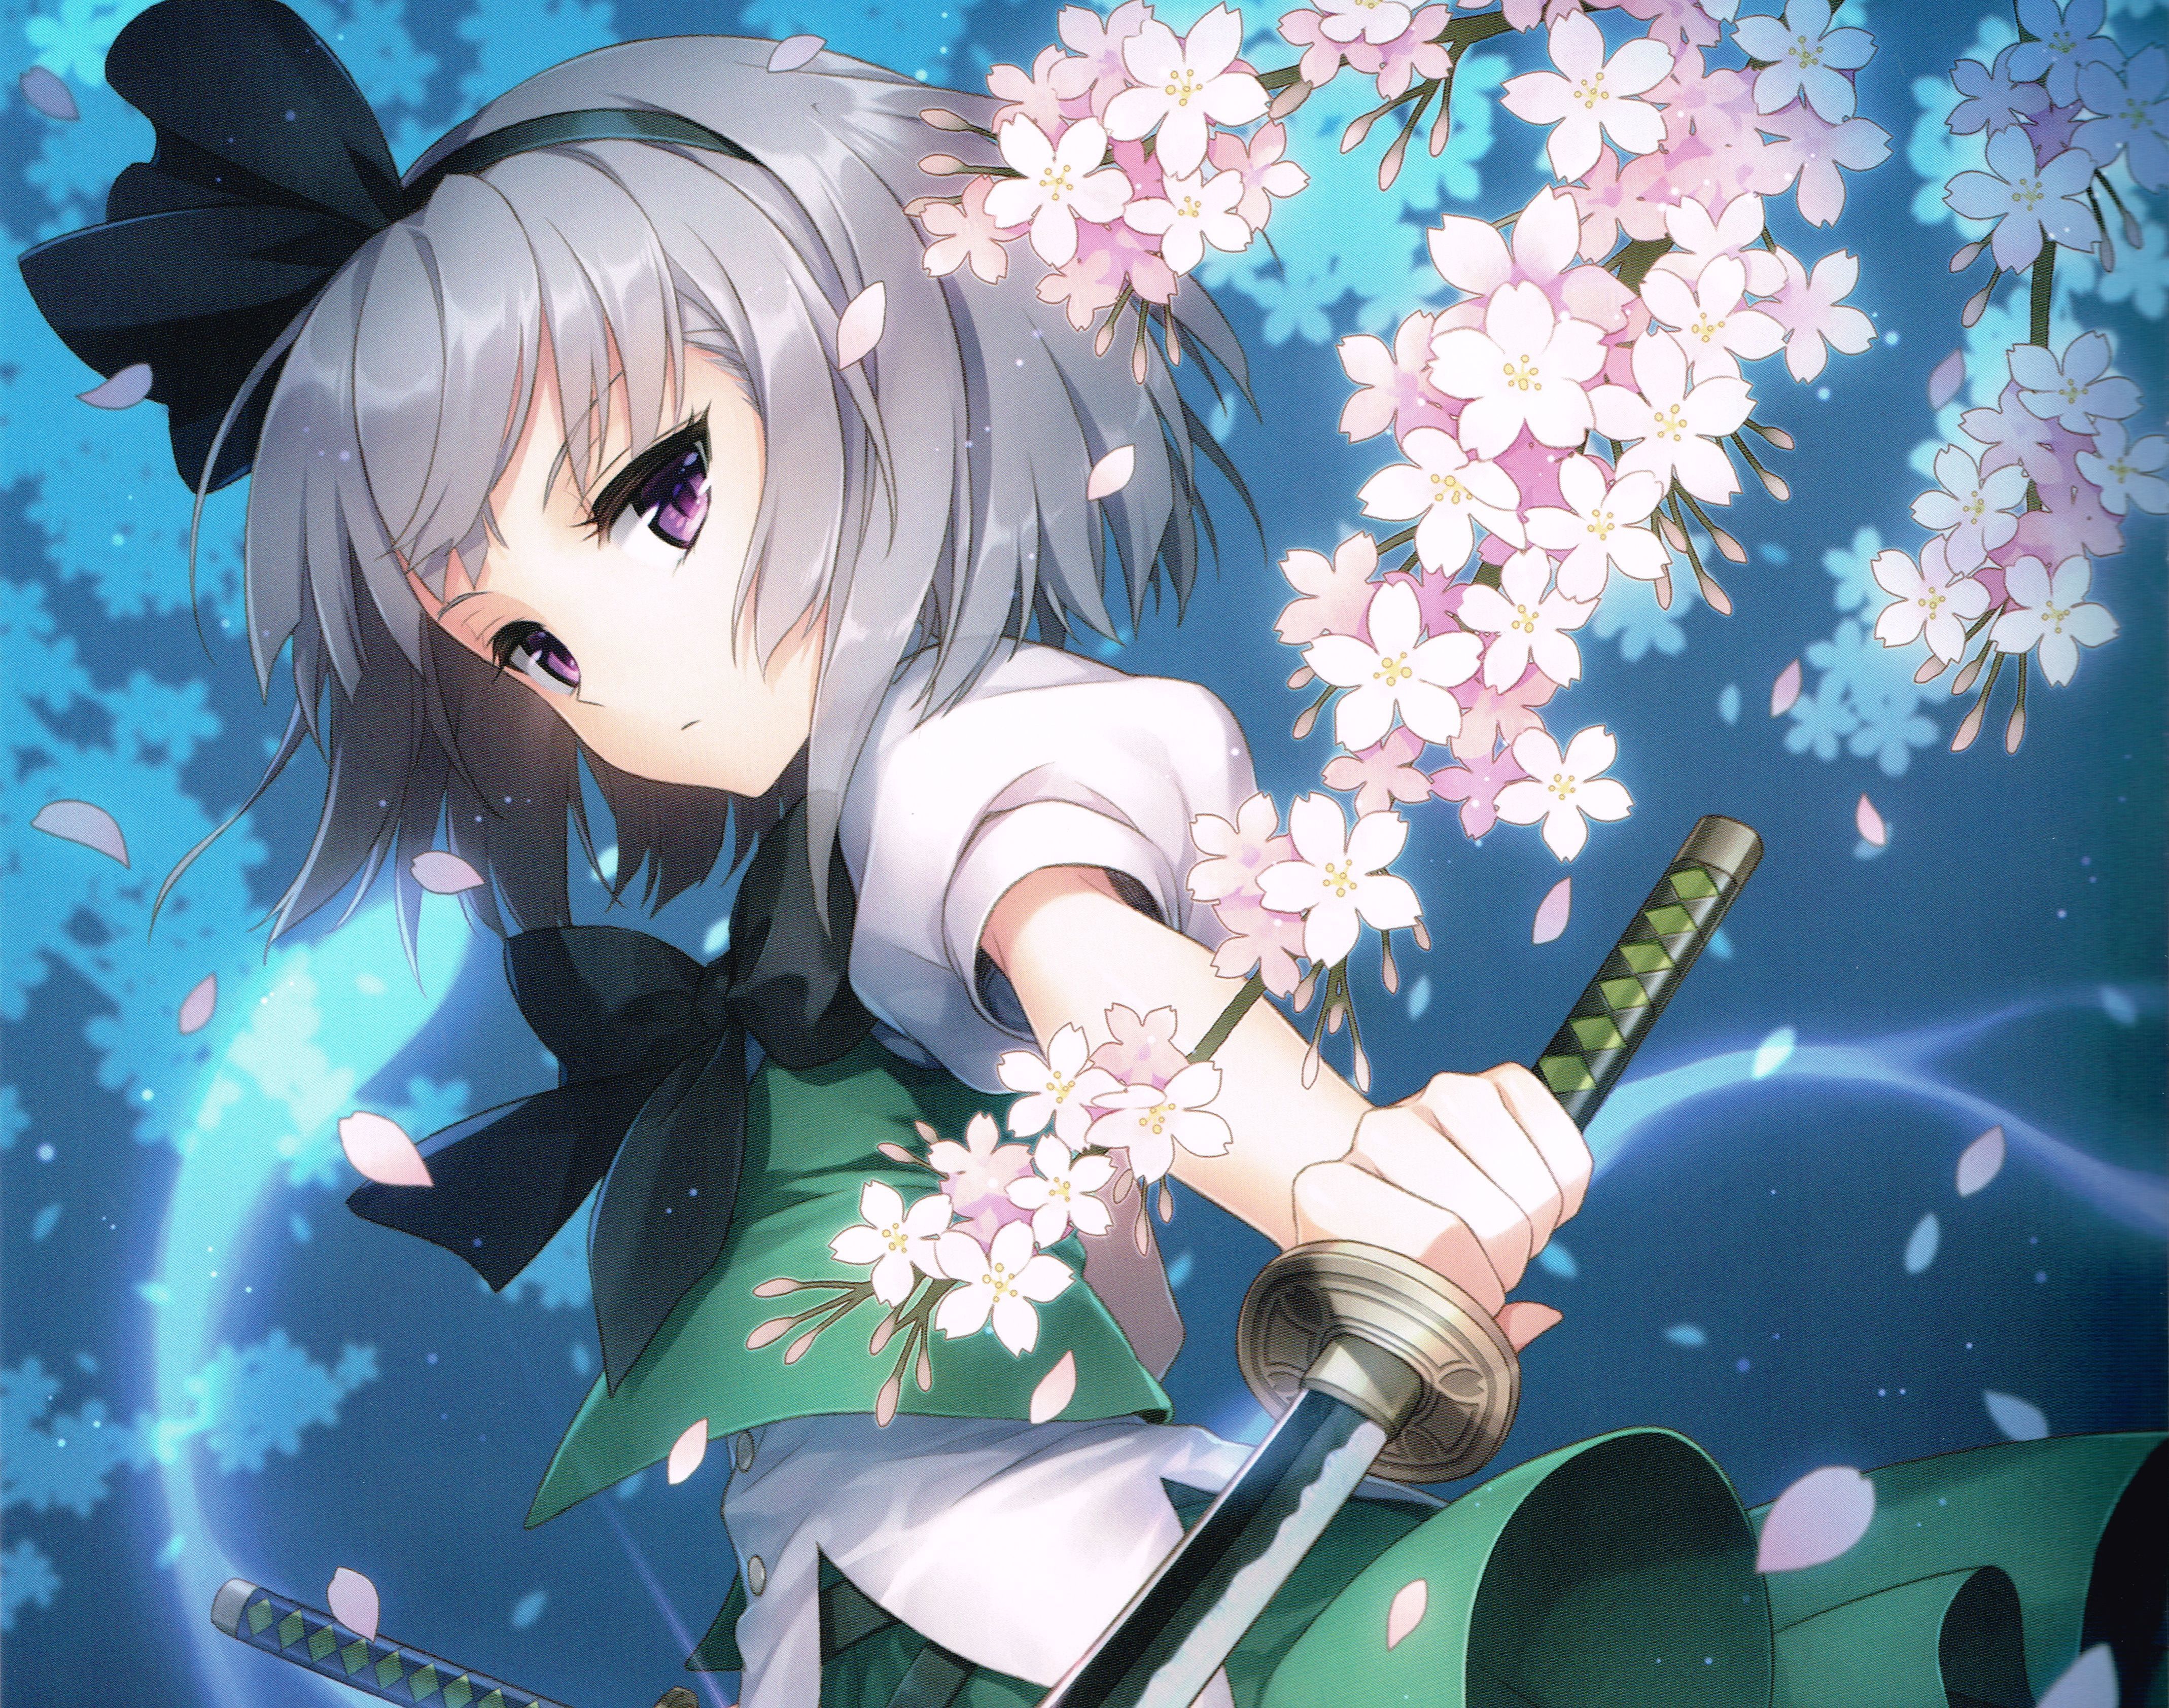 Anime Girl With Long Black Hair And Brown Eyes In Spring Background,  Nightcore Pictures Background Image And Wallpaper for Free Download